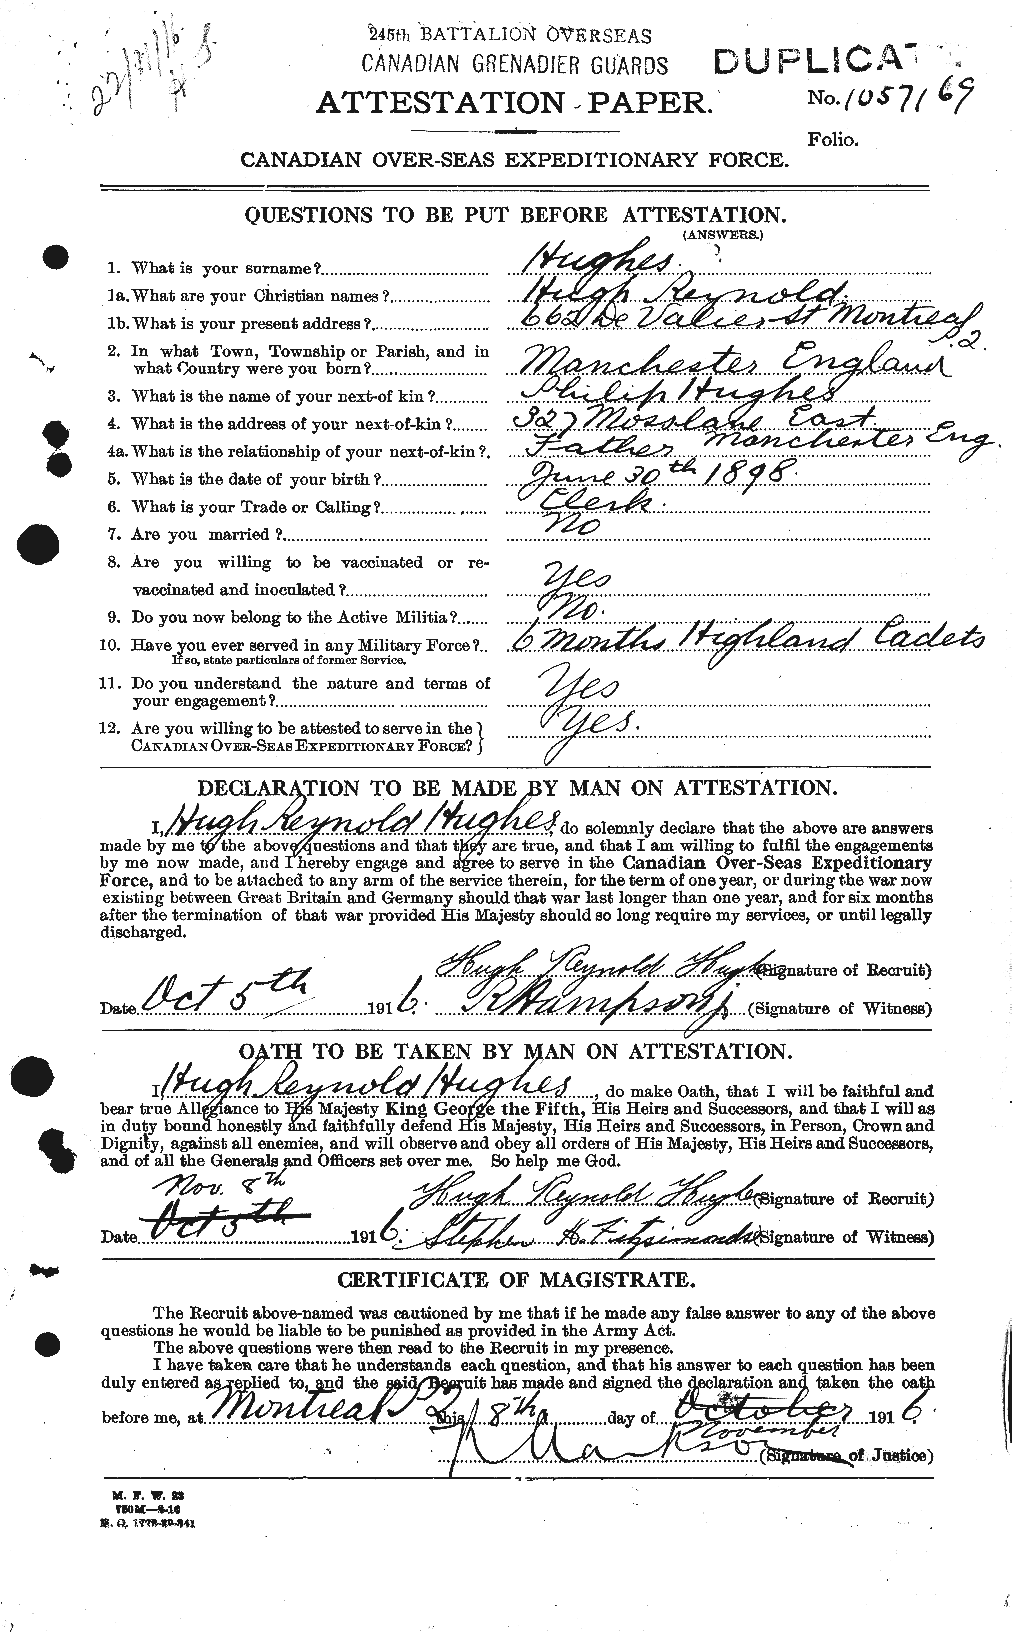 Personnel Records of the First World War - CEF 403926a